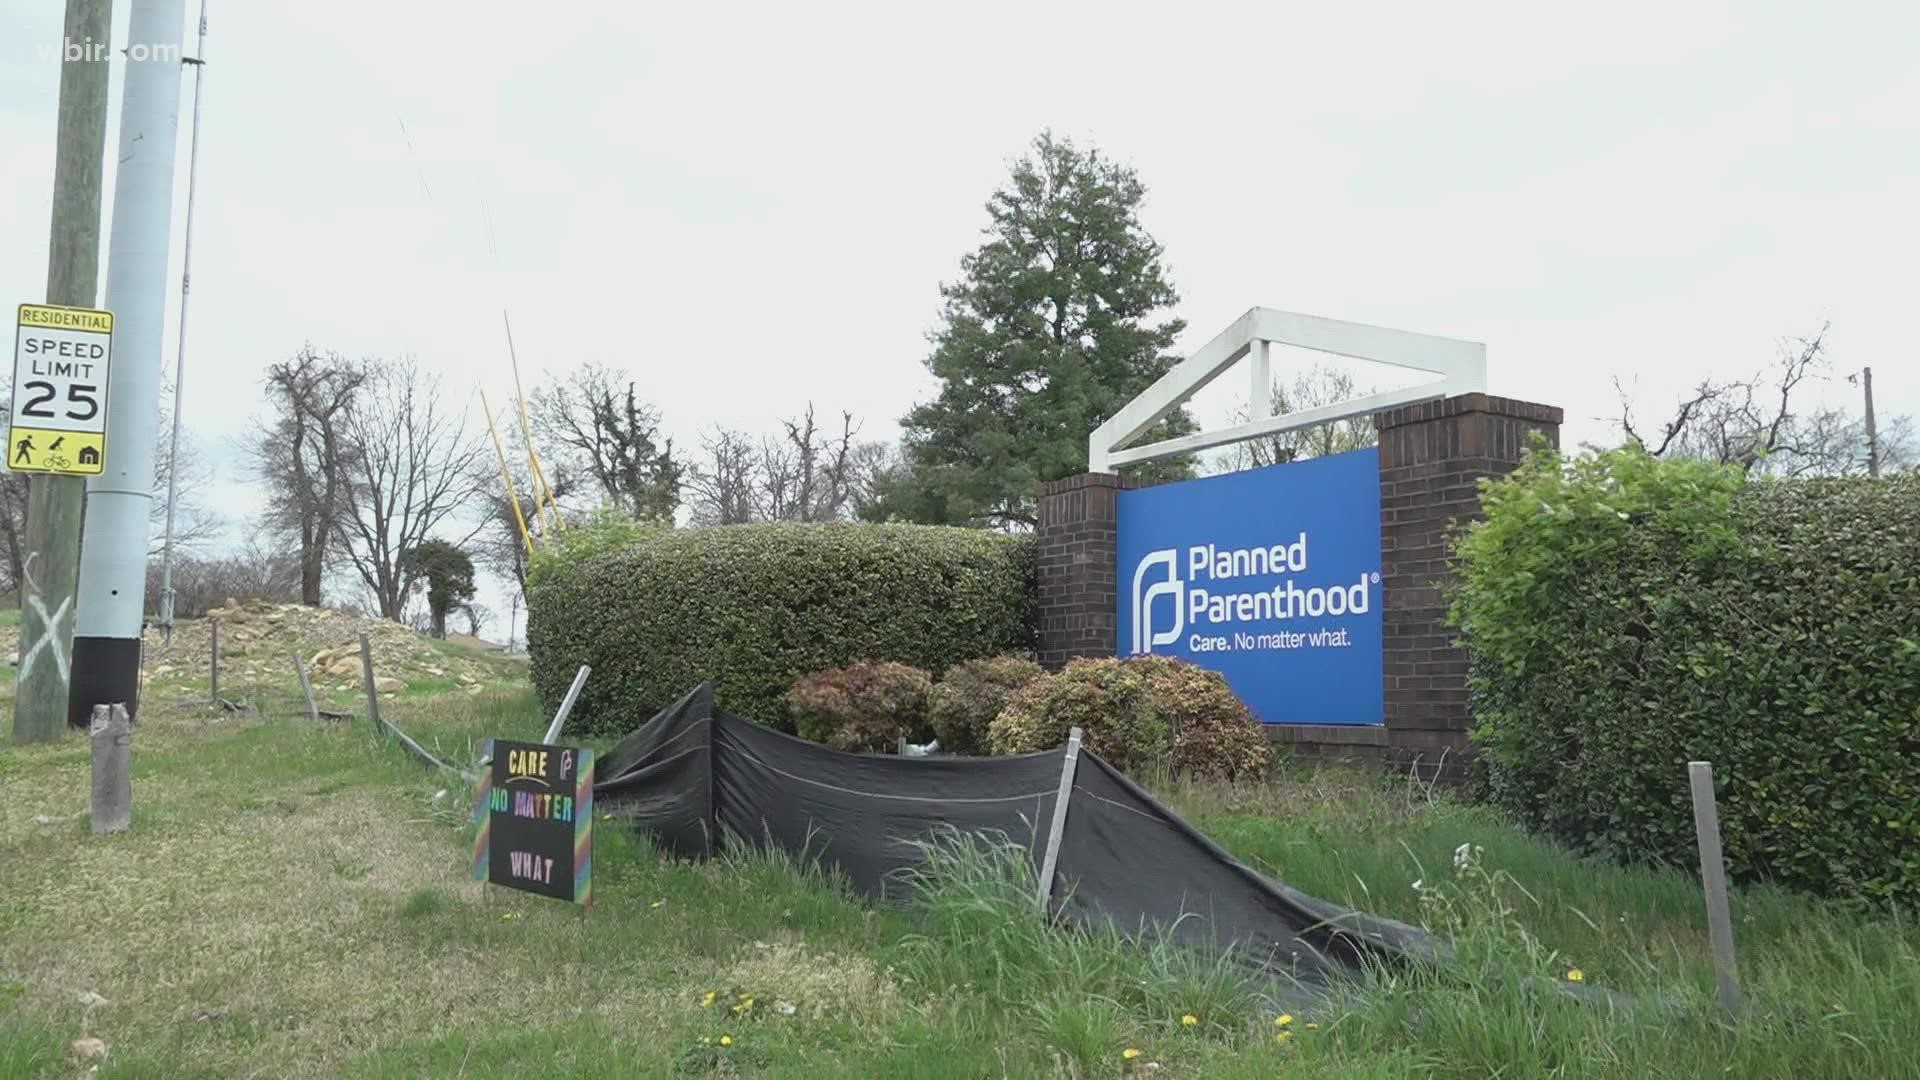 Authorities said an arsonist likely burned down Knoxville's Planned Parenthood clinic on New Year's Eve in Dec. 2021.